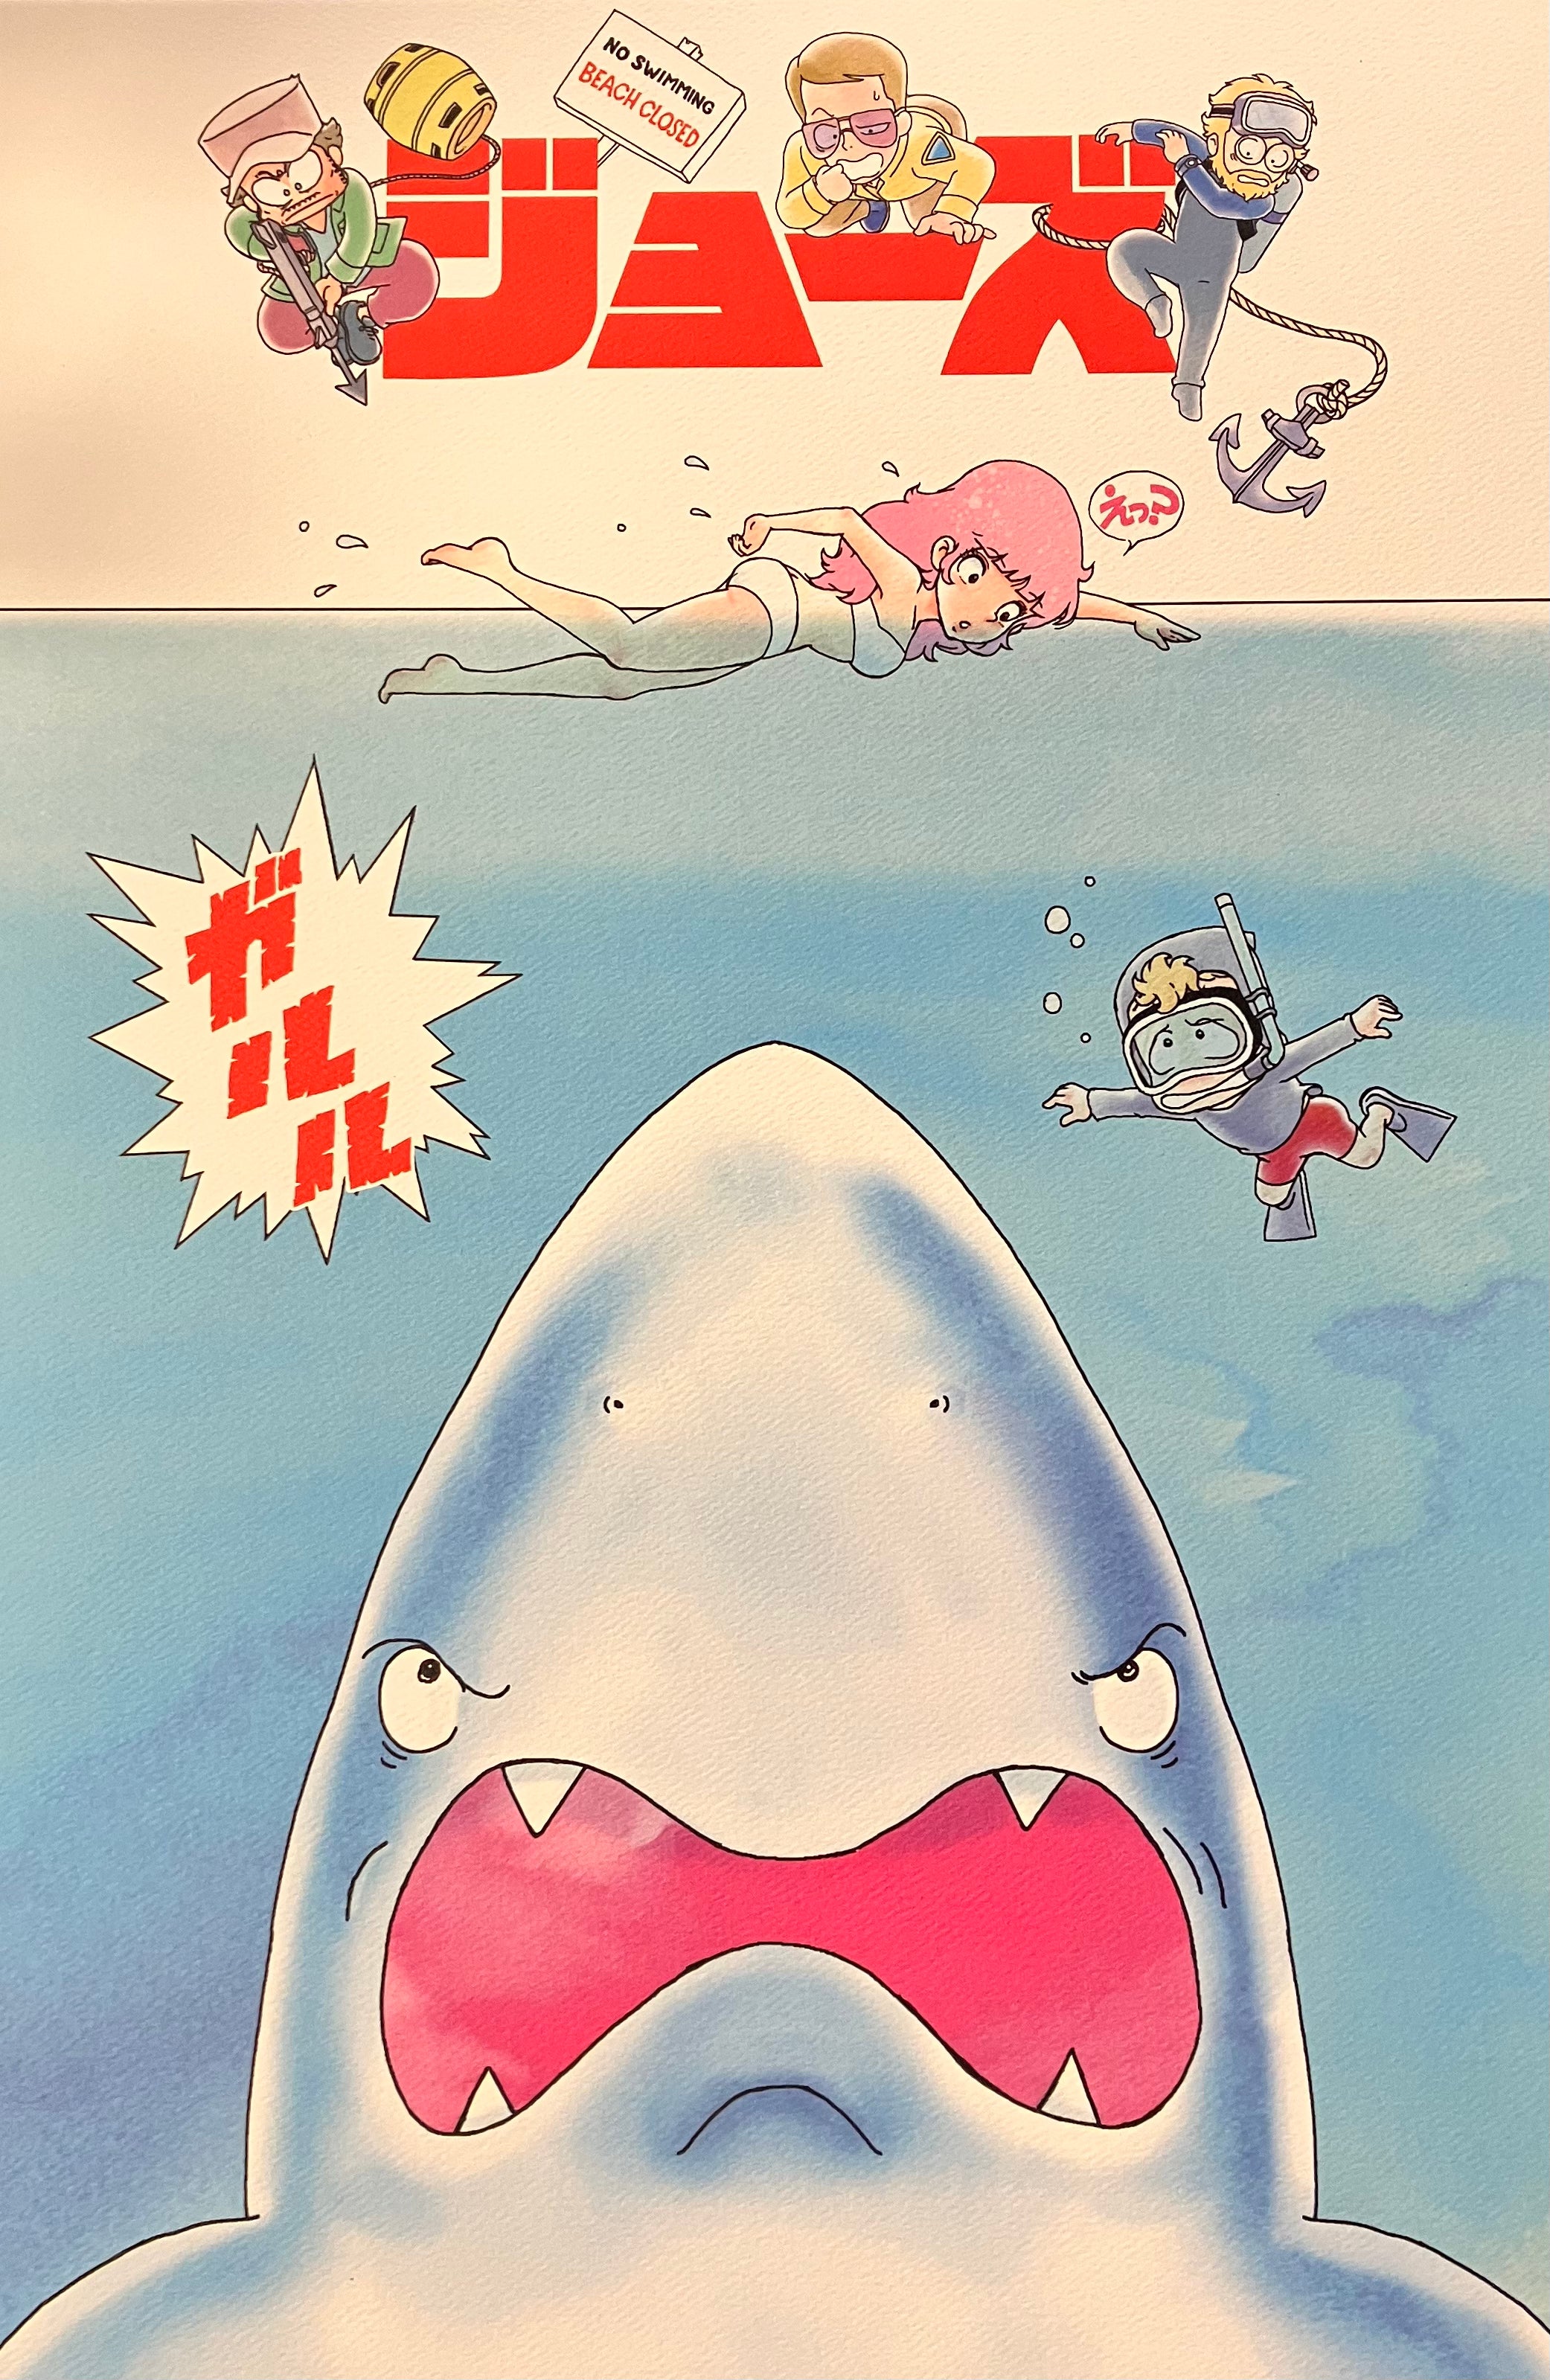 Jaws Anime Style Licenced A3 Print